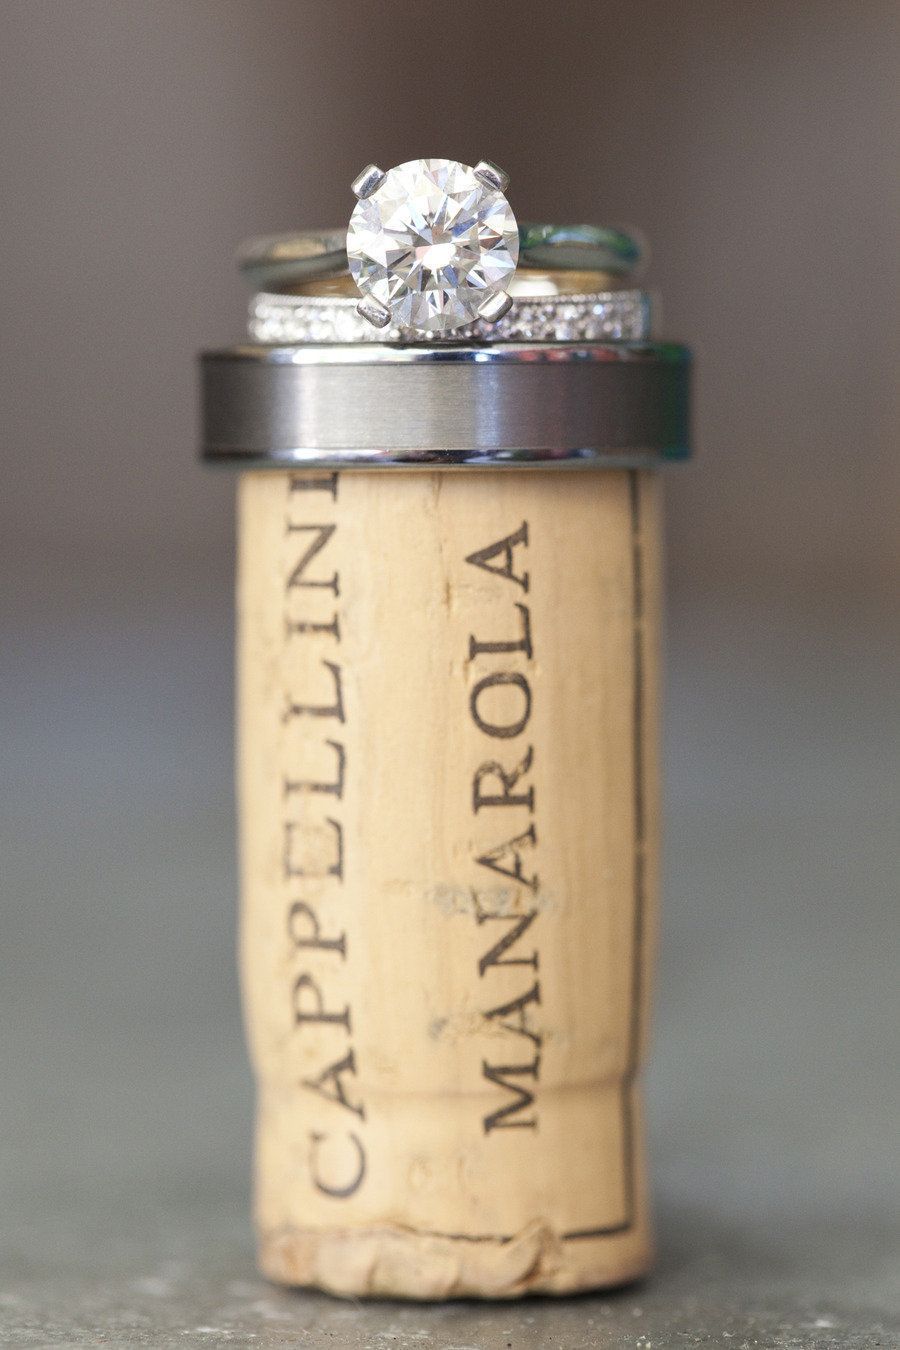 pic w/ the cork from the champagne toast. This would be so cute to hang in your